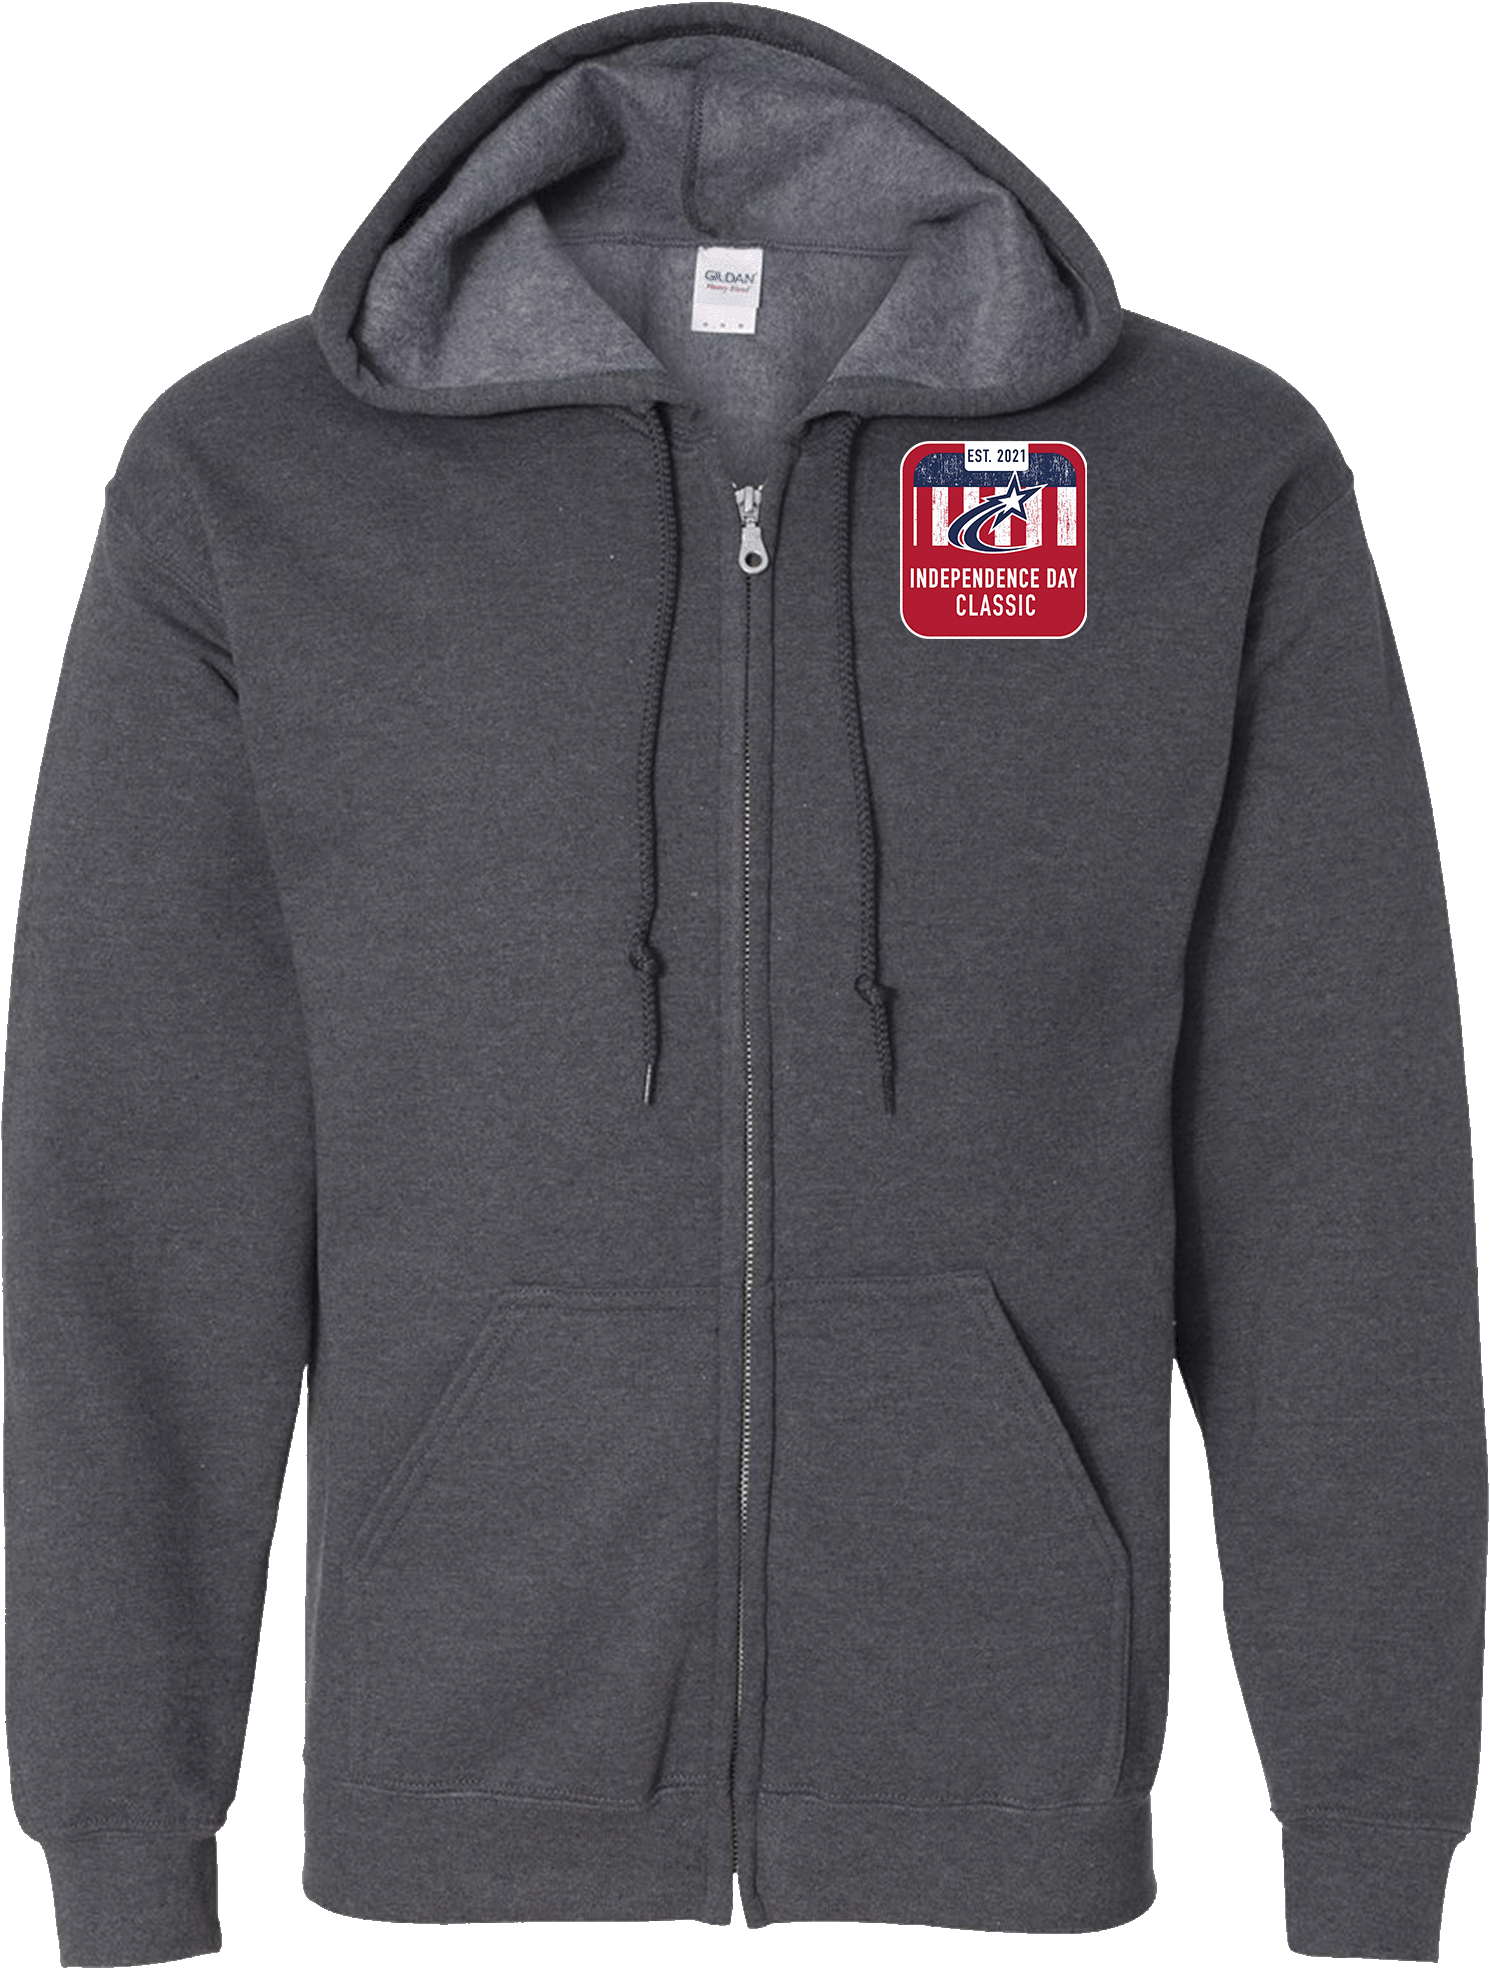 Full Zip Hoodies - 2023 Independence Day Classic